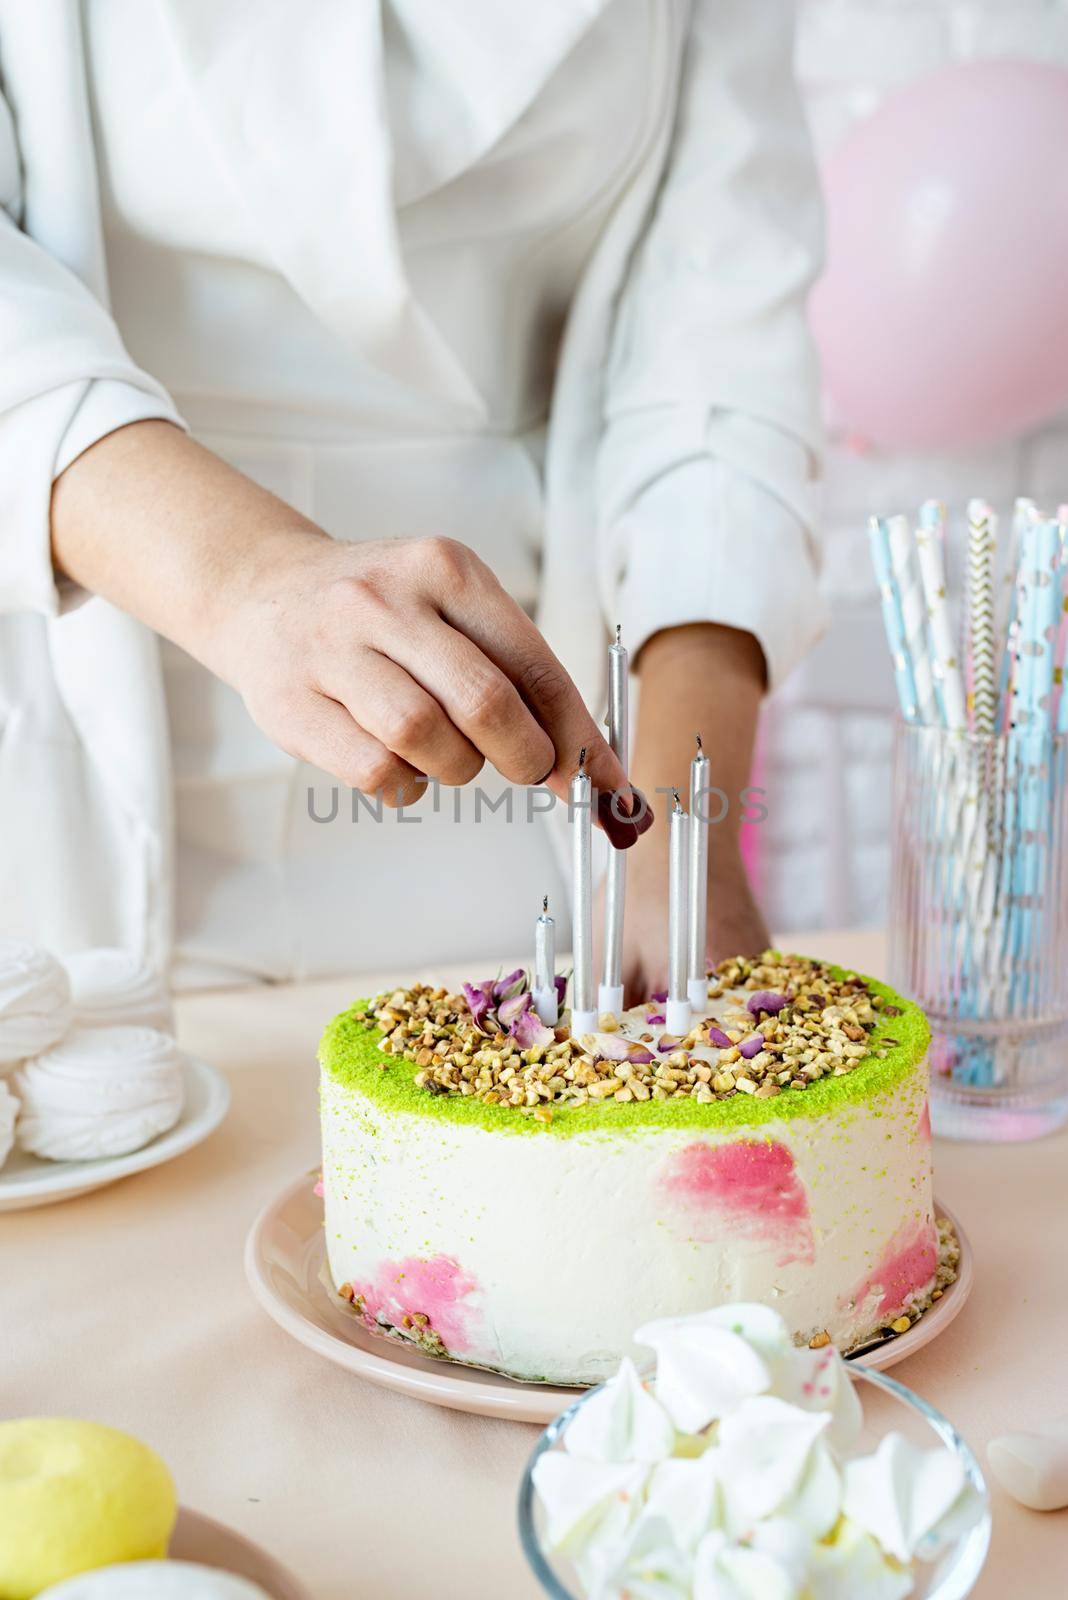 Birthday party. Attractive woman in white party clothes preparing birthday table, putting candles to cake